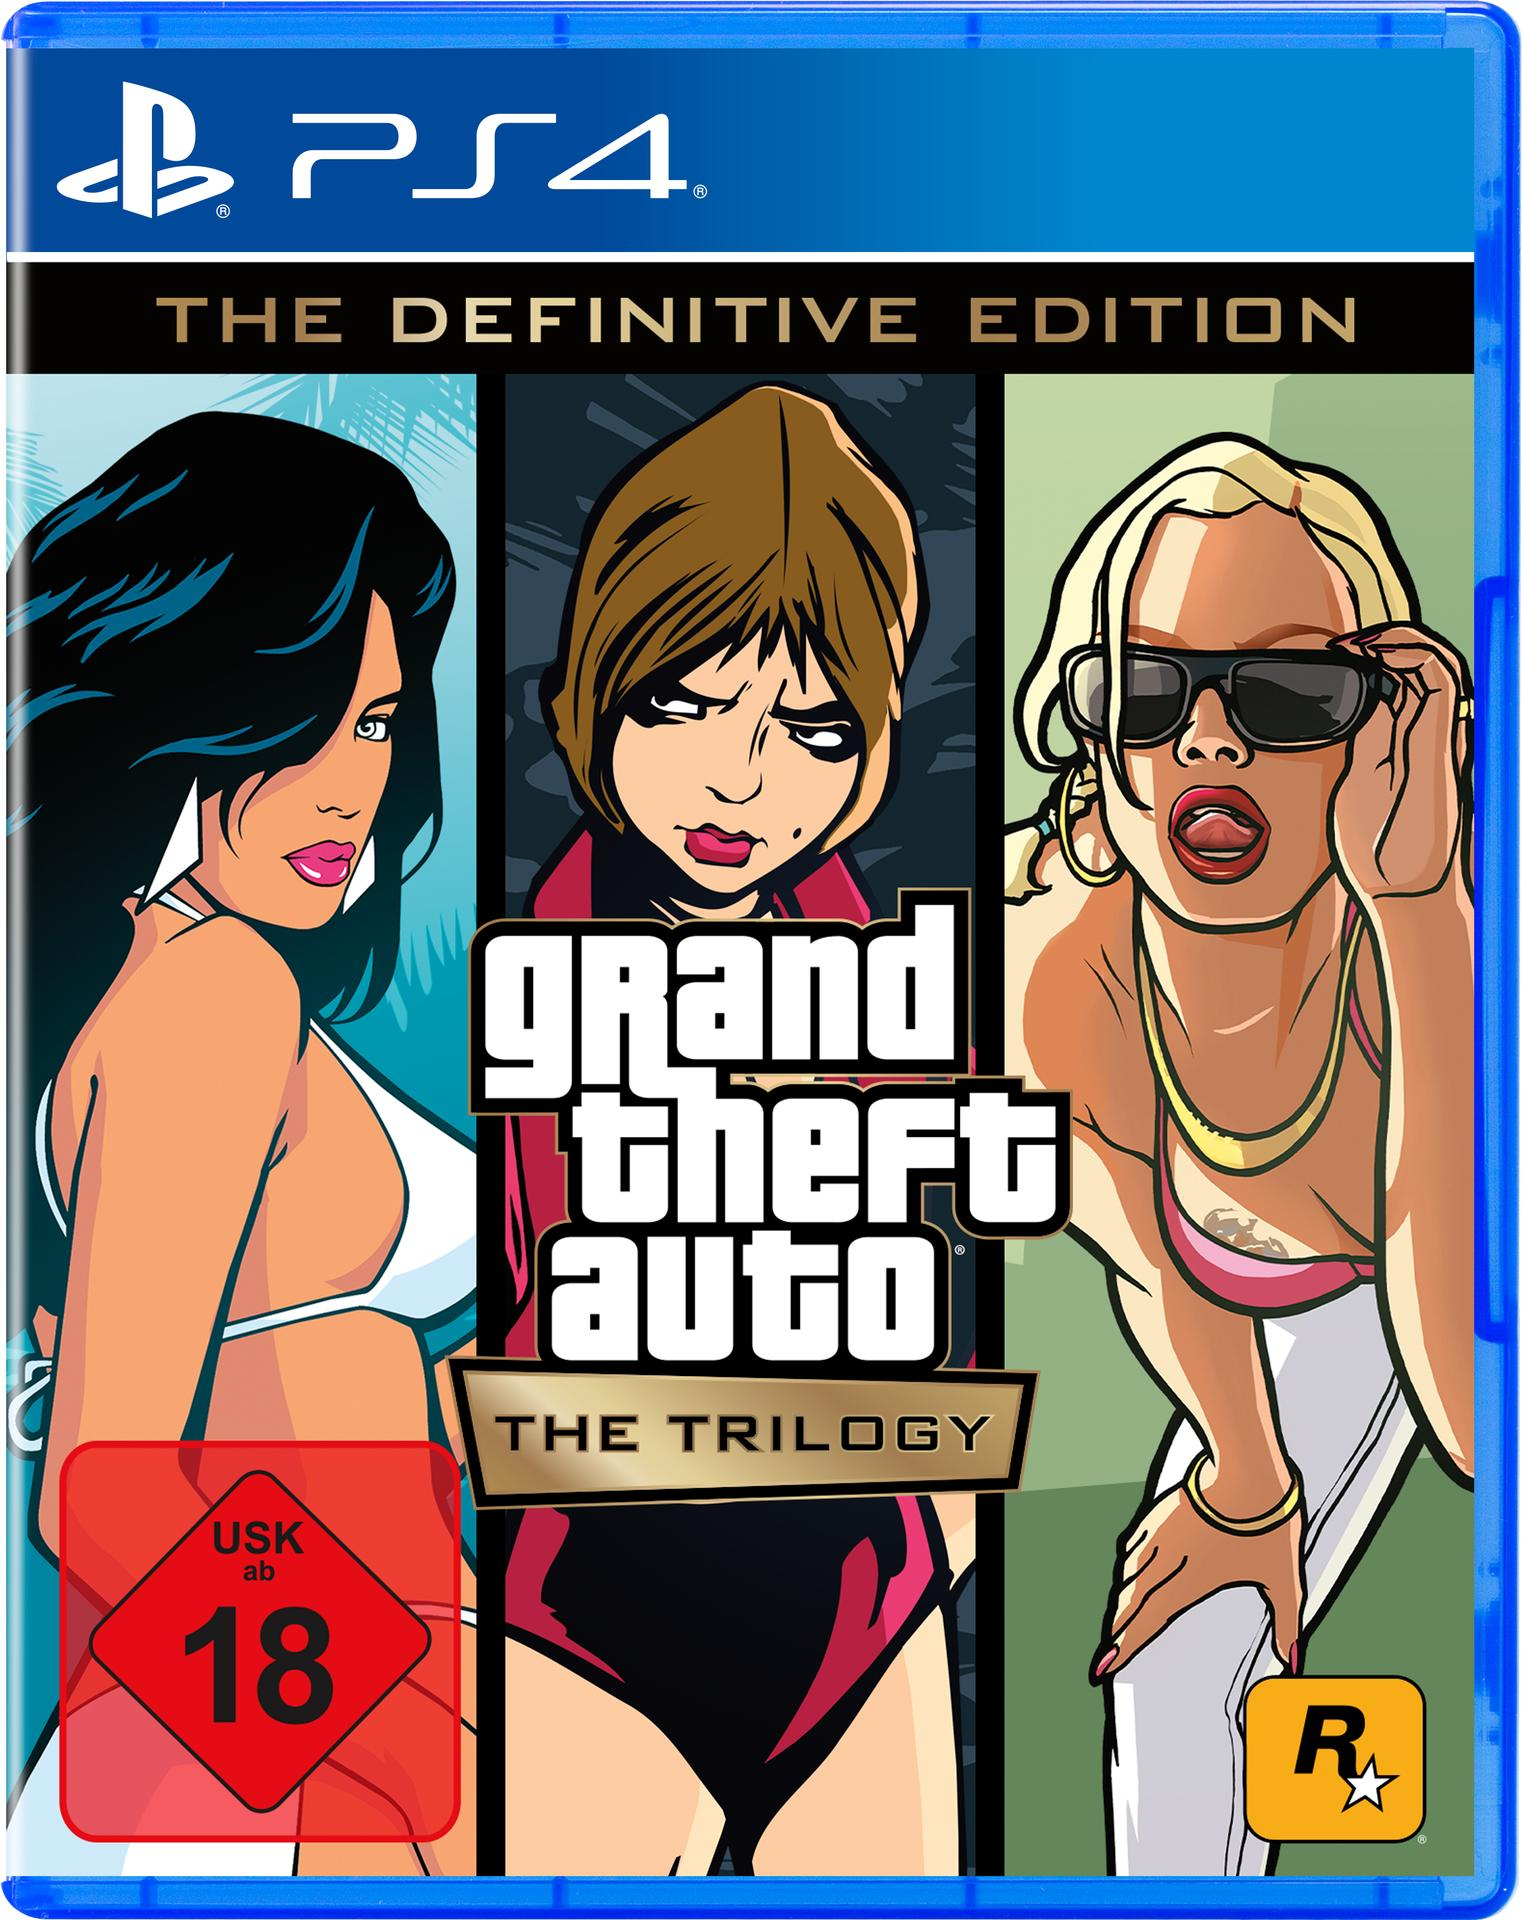 GTA5 – The Definitive The - Edition [PlayStation Auto: - 4] Trilogy Theft Grand